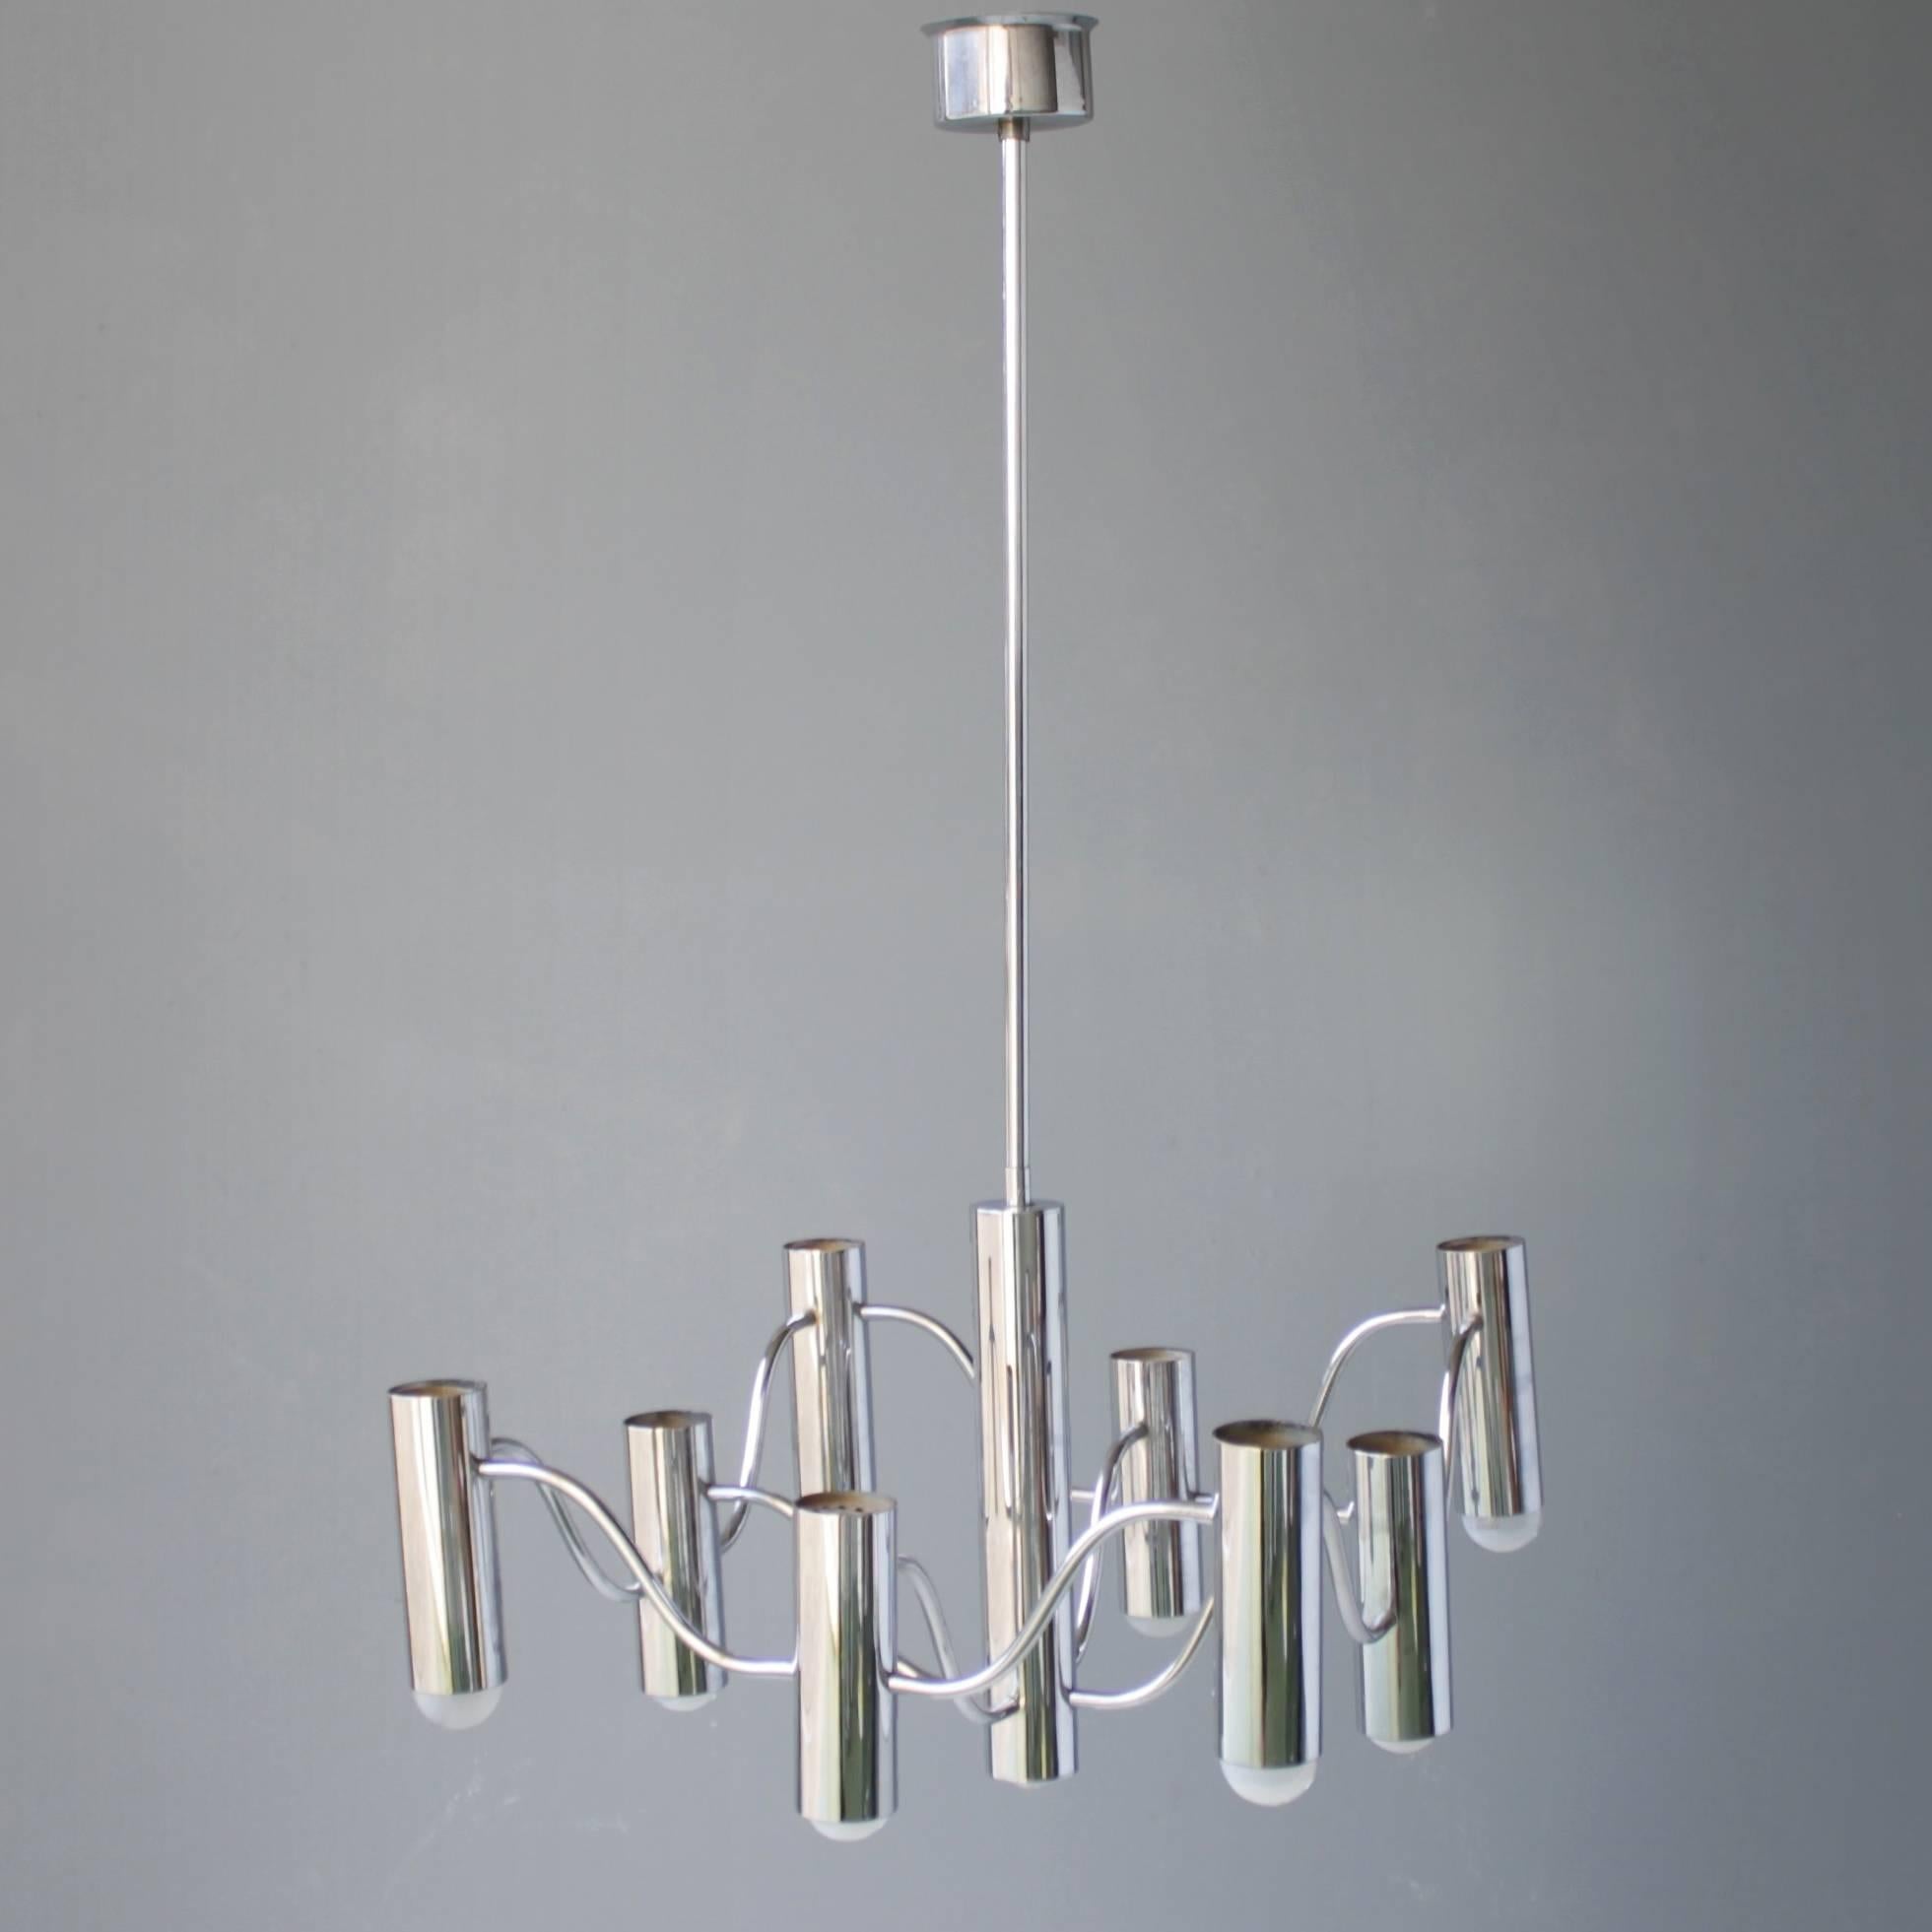 Chrome chandelier by Gaetano Sciolari with eight lights. Total height: 35.8 in. (91 cm), diameter 18.9 inches (48 cm).
Though the Sciolari company was founded in Rome in the 1890s, the name Sciolari only attracted international attention more than